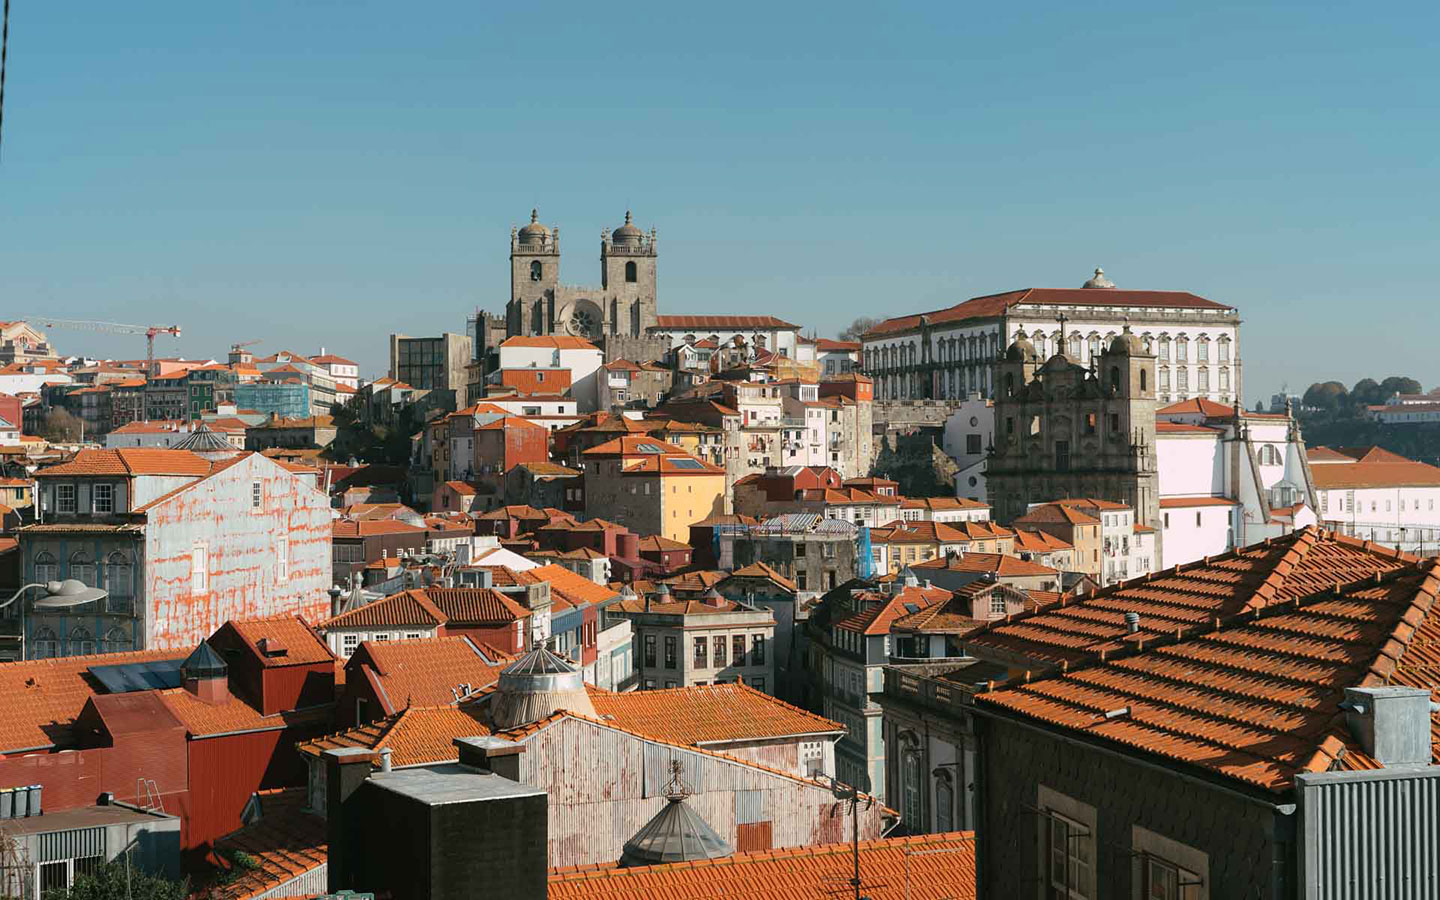 Porto is a spectacular city